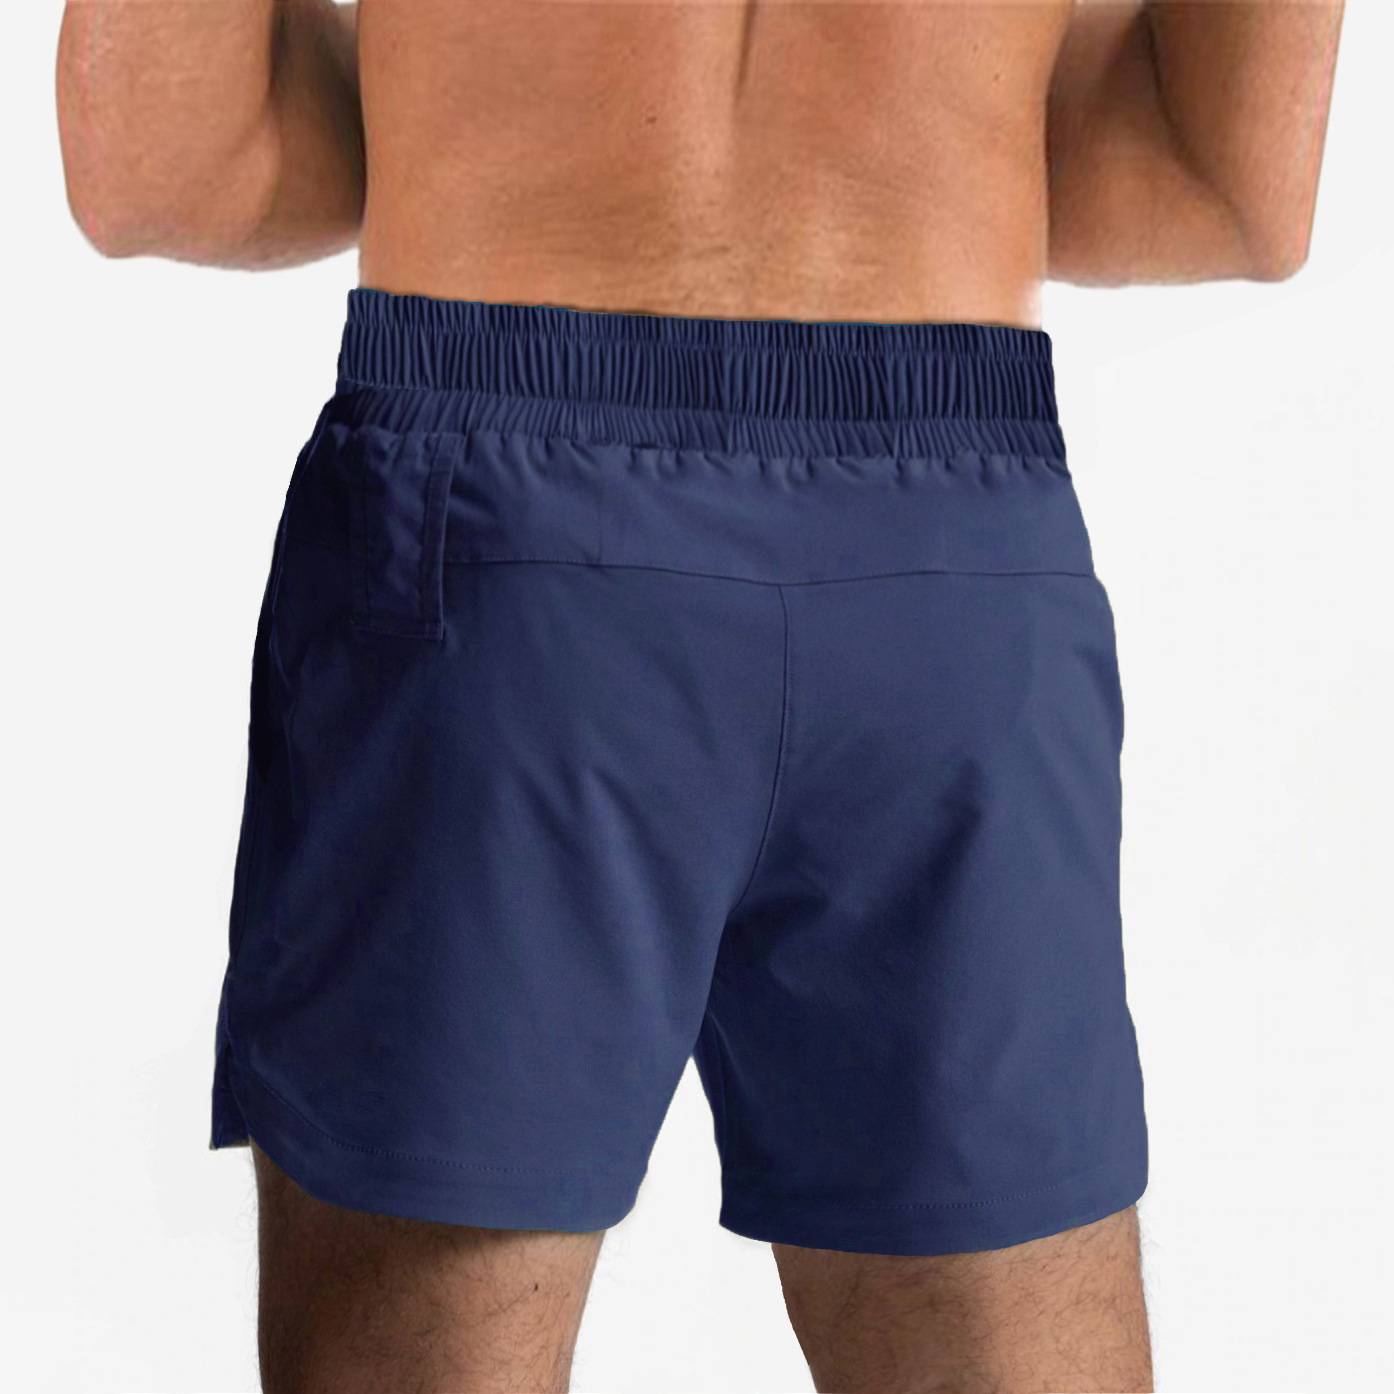 Men's Elastic Quick-Dry Basketball Shorts Essential for Summer Fitness Training